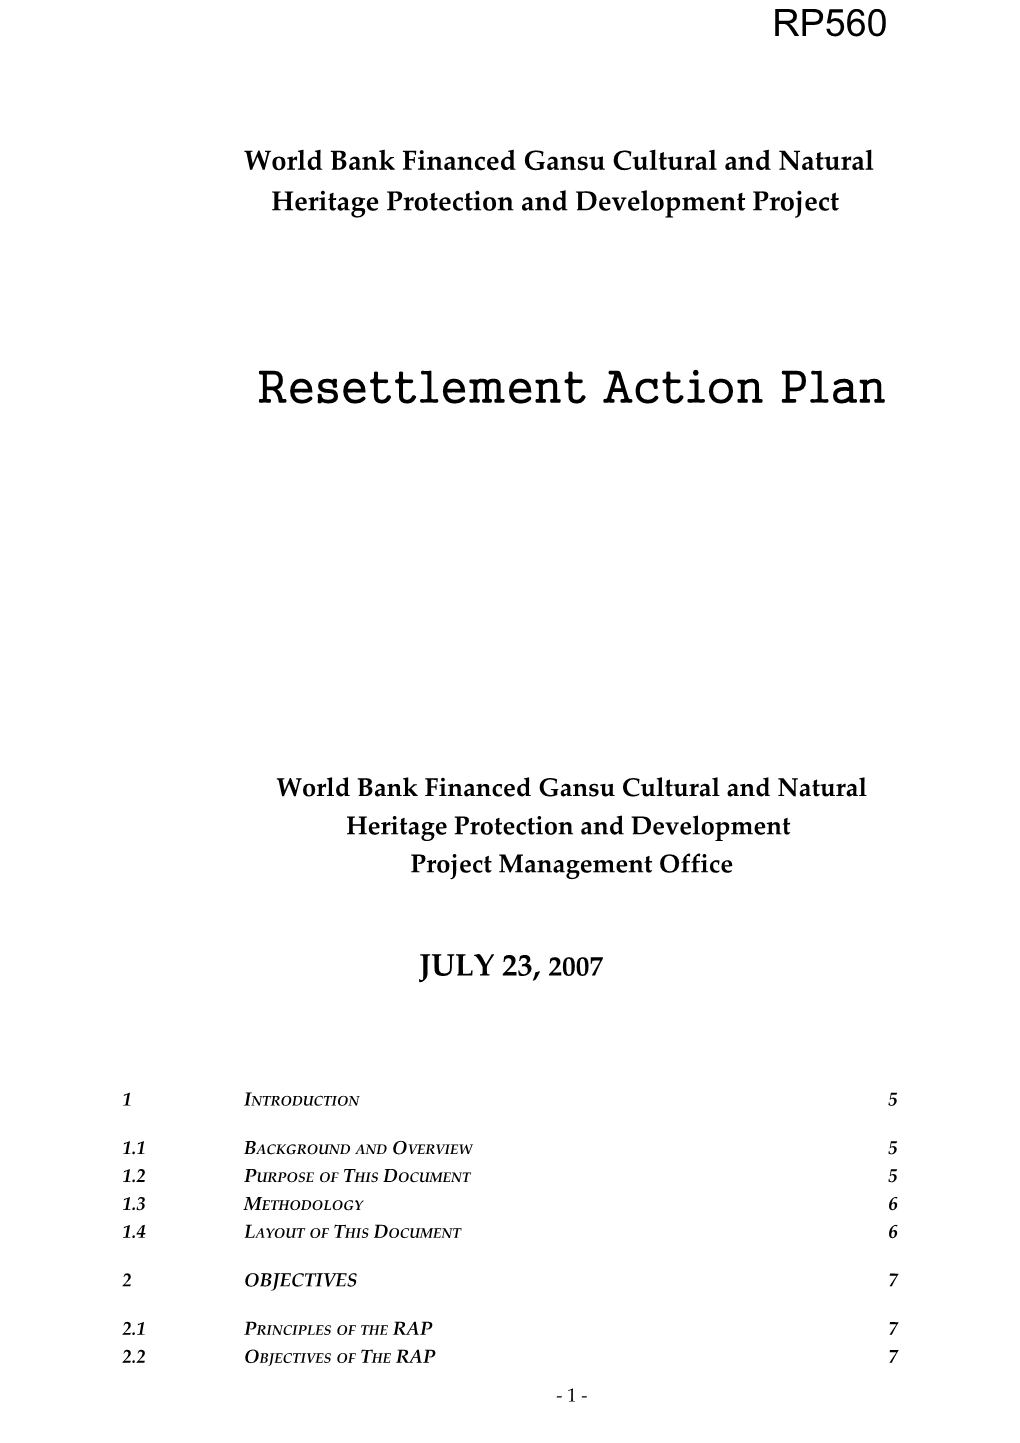 World Bank Financedgansu Cultural and Natural Heritage Protection and Development Project